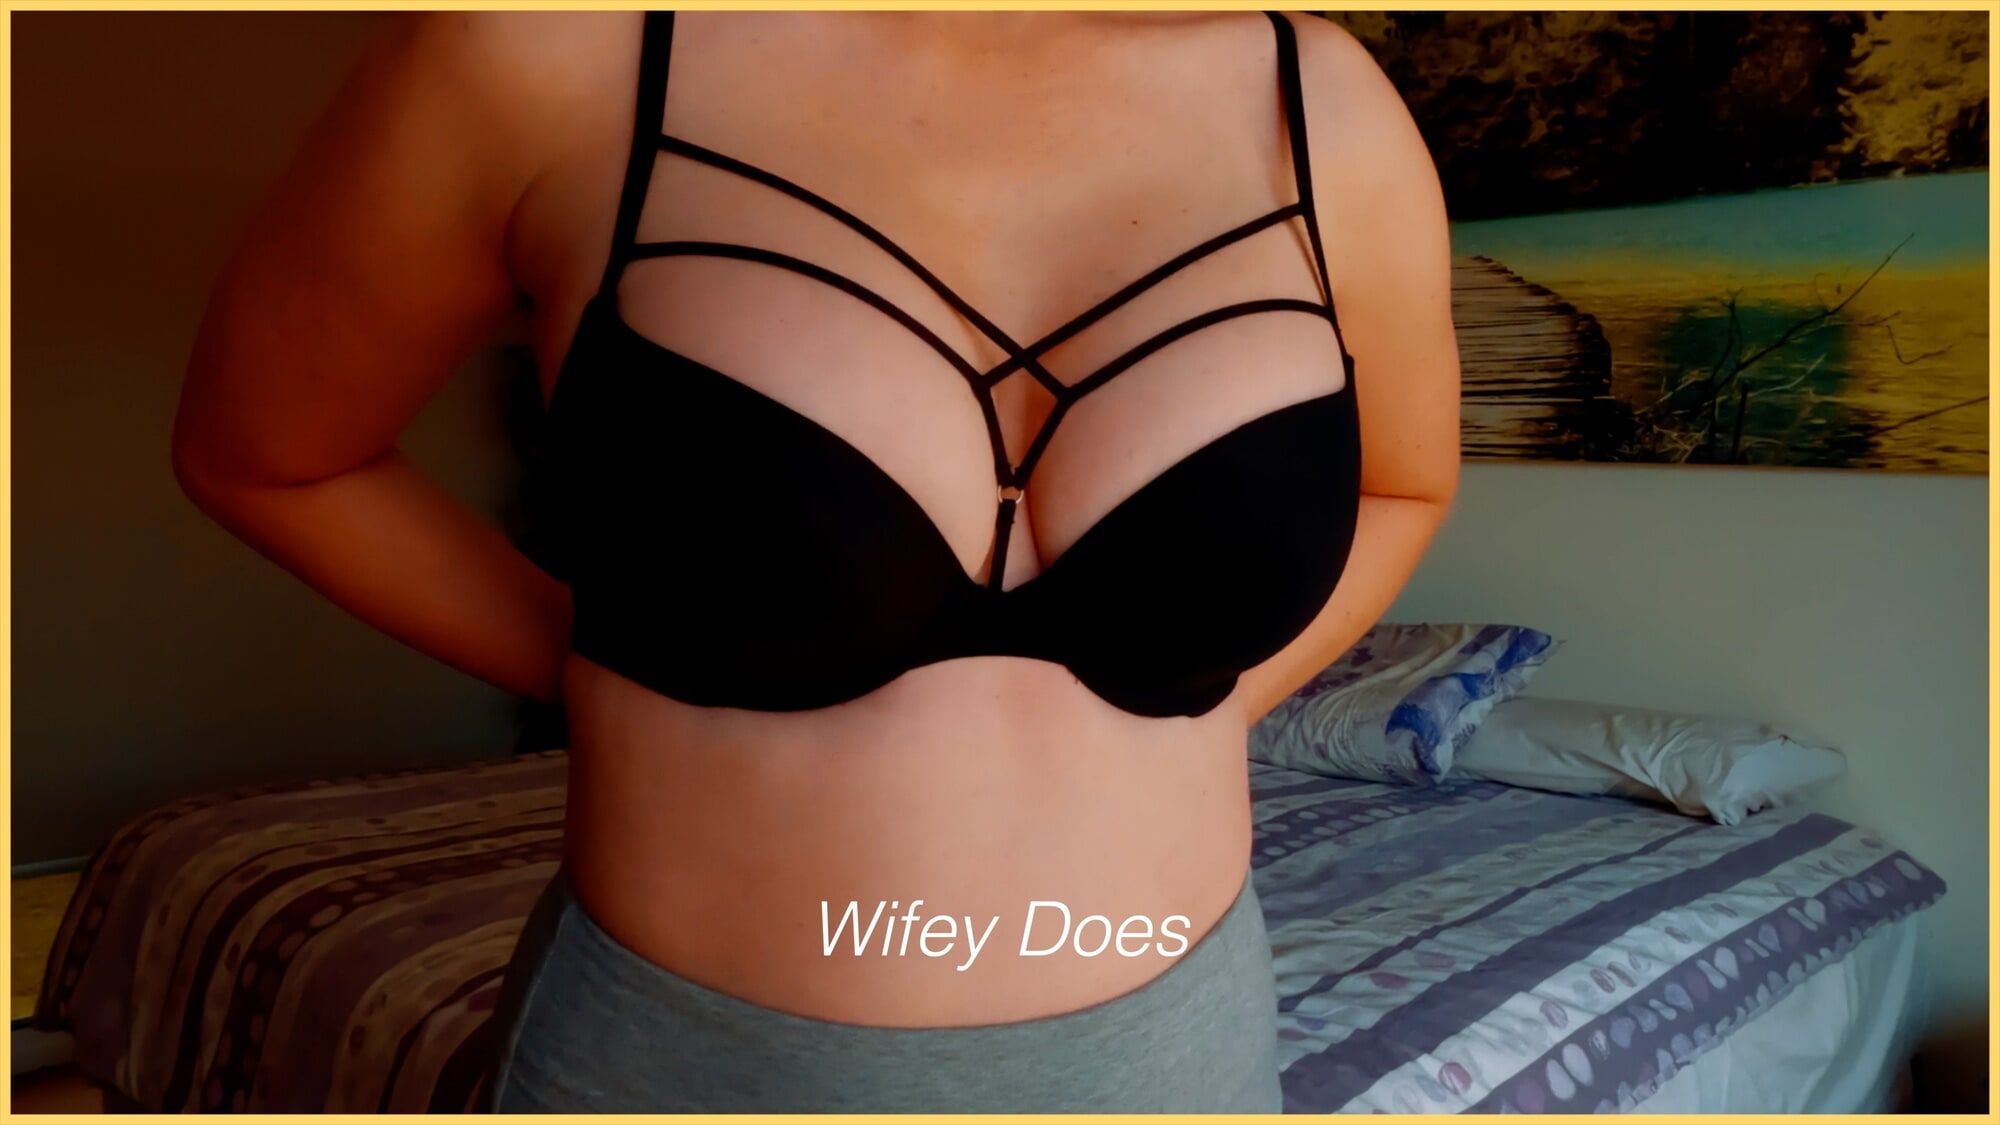 Wifey tries on her hot and sexy lingerie #4